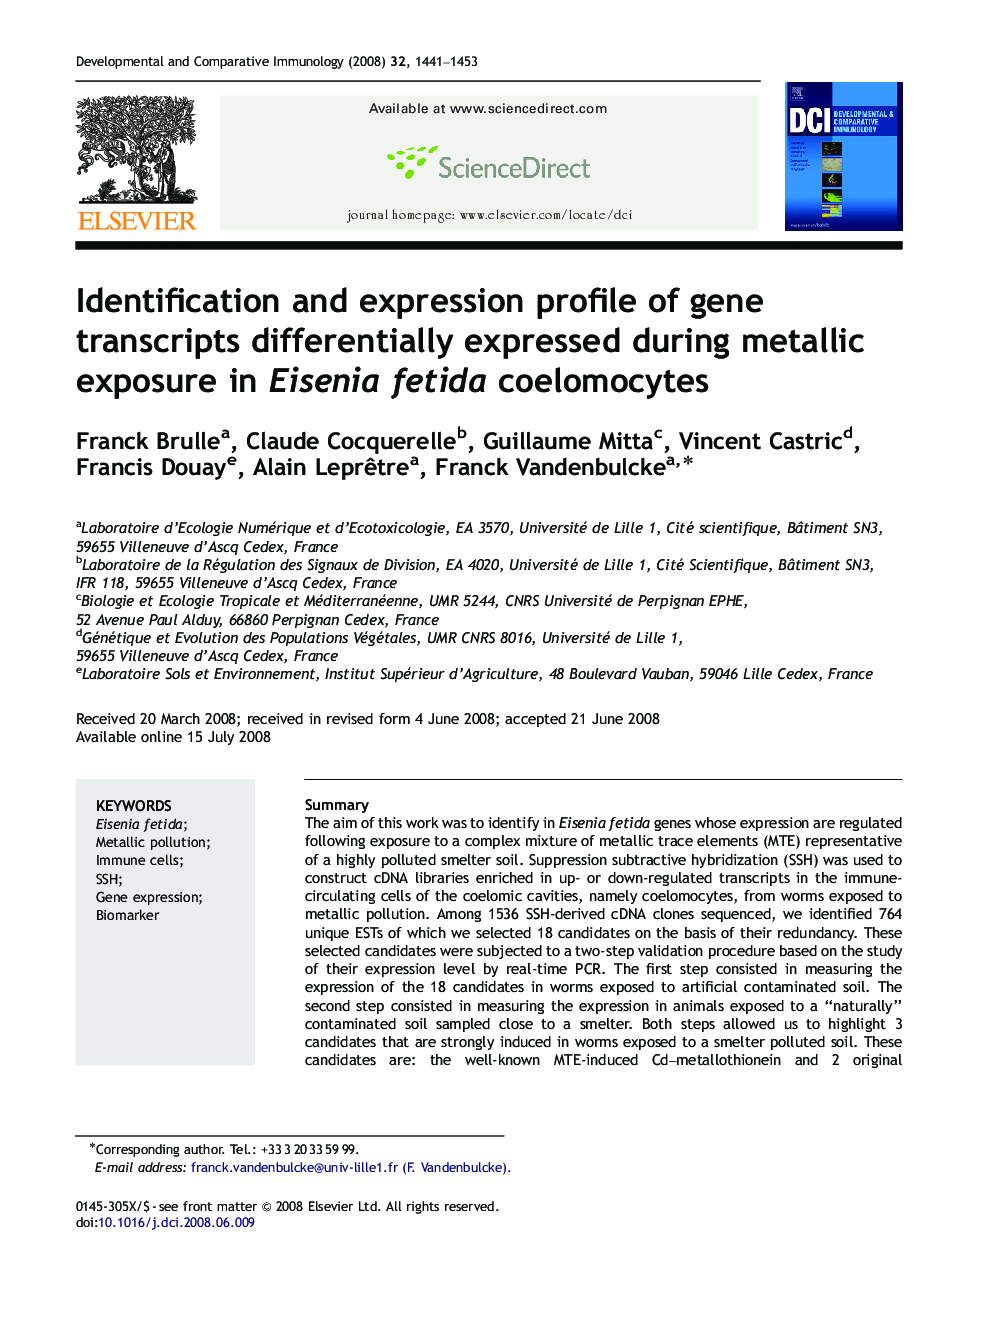 Identification and expression profile of gene transcripts differentially expressed during metallic exposure in Eisenia fetida coelomocytes